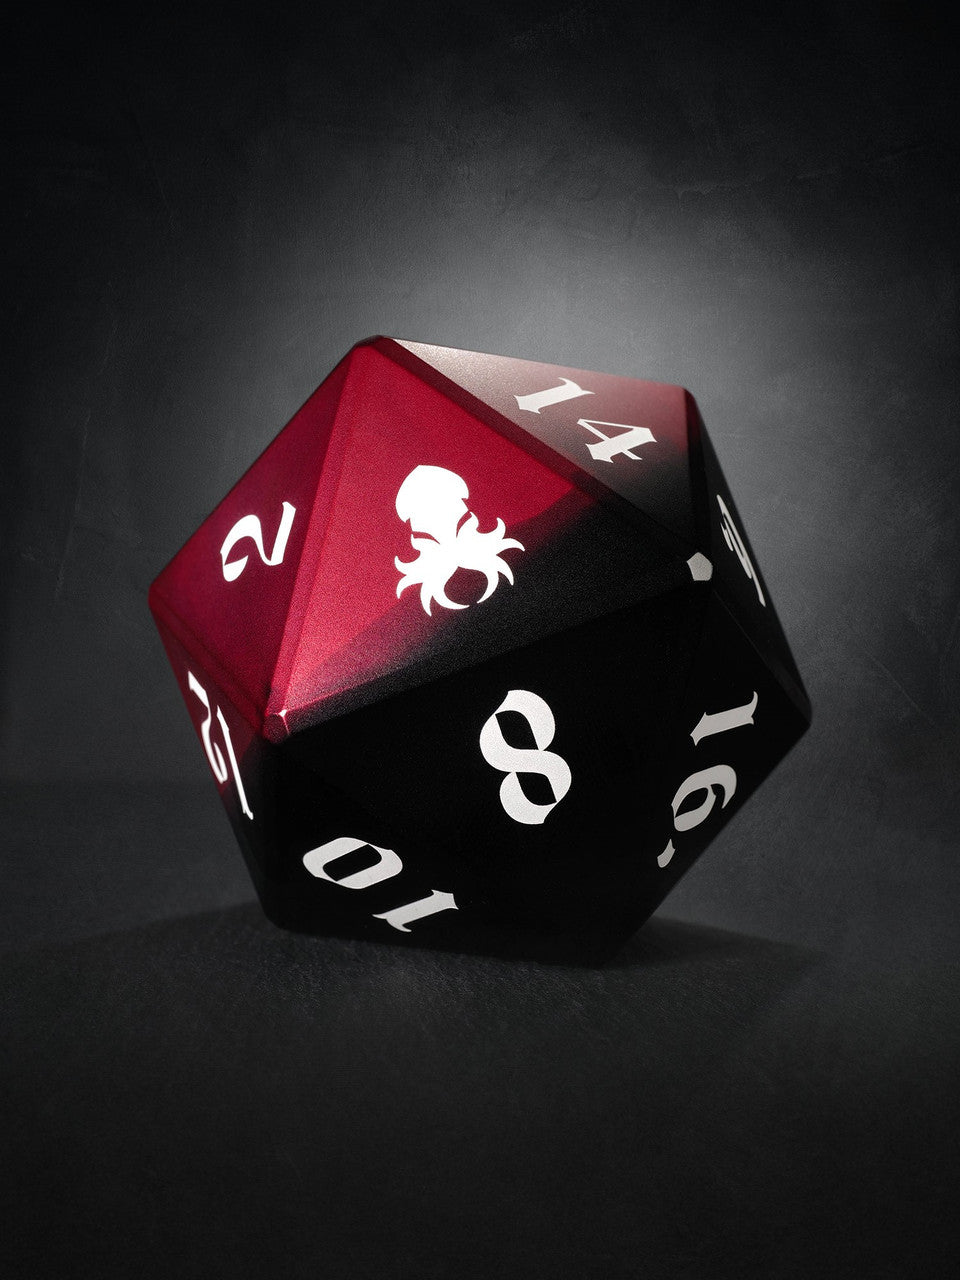 Vulcan: Blood Knight 75mm Black and Red Precision Aluminum Single D20